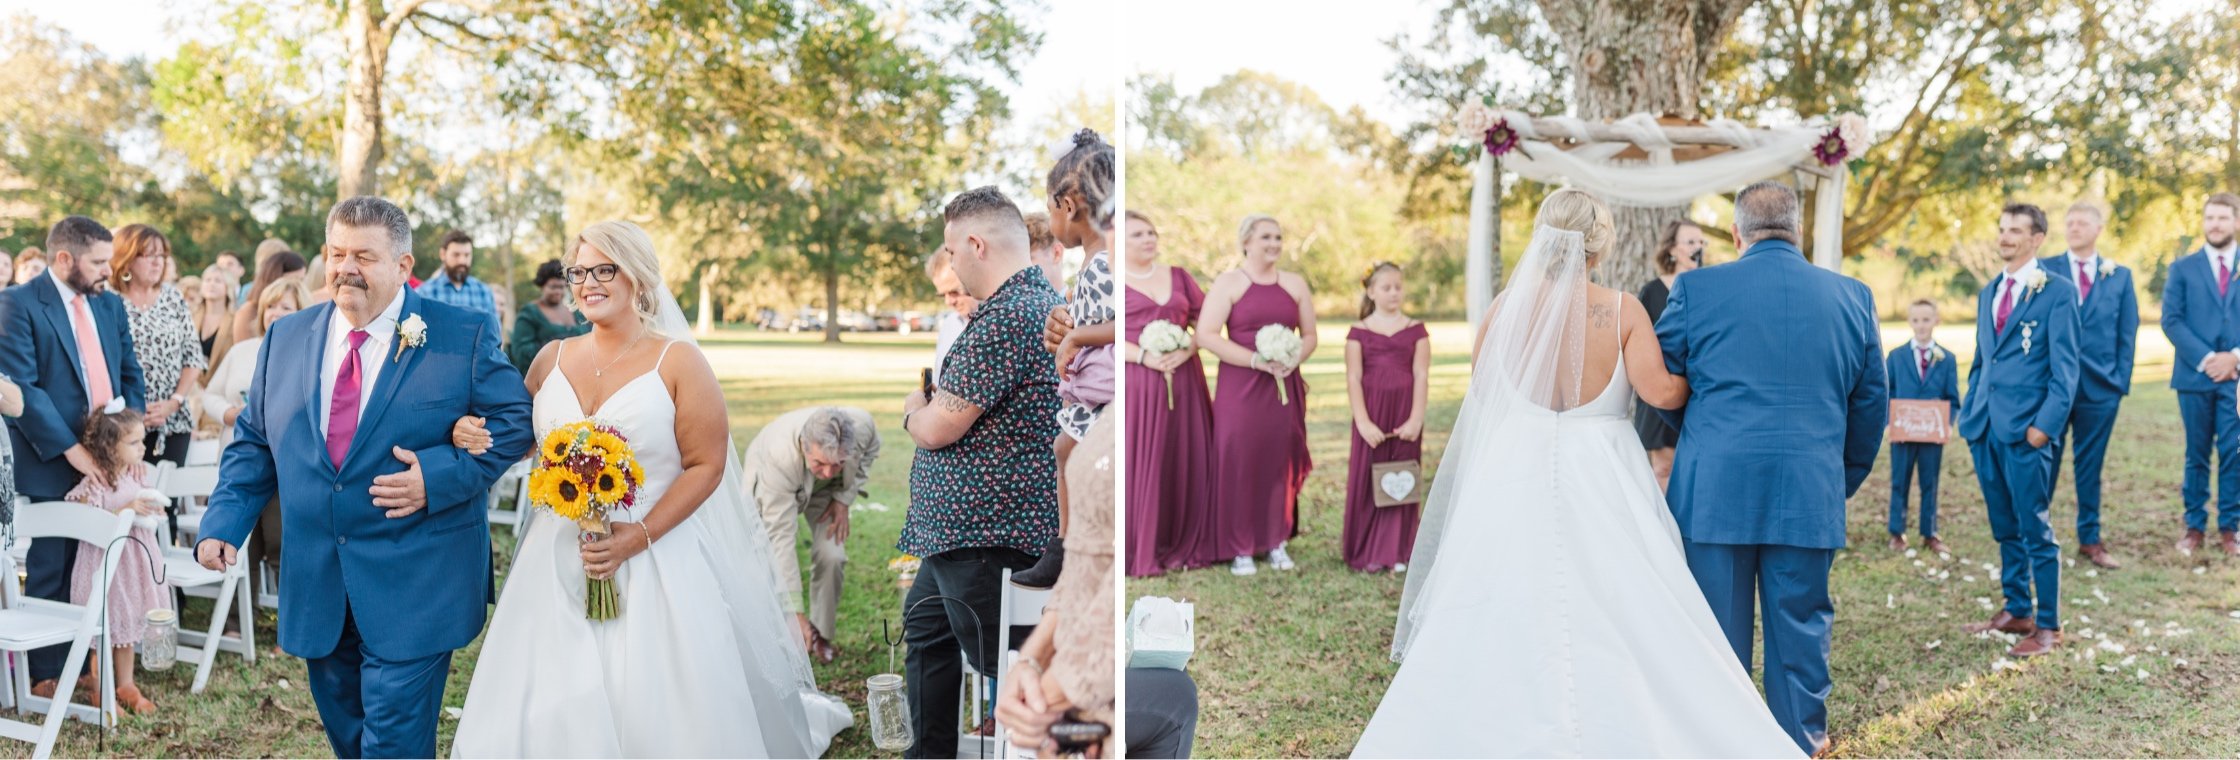 Intimate Fall Back / Front Yard Wedding in Mobile Alabama in October Photographed by Kristen Marcus Photography